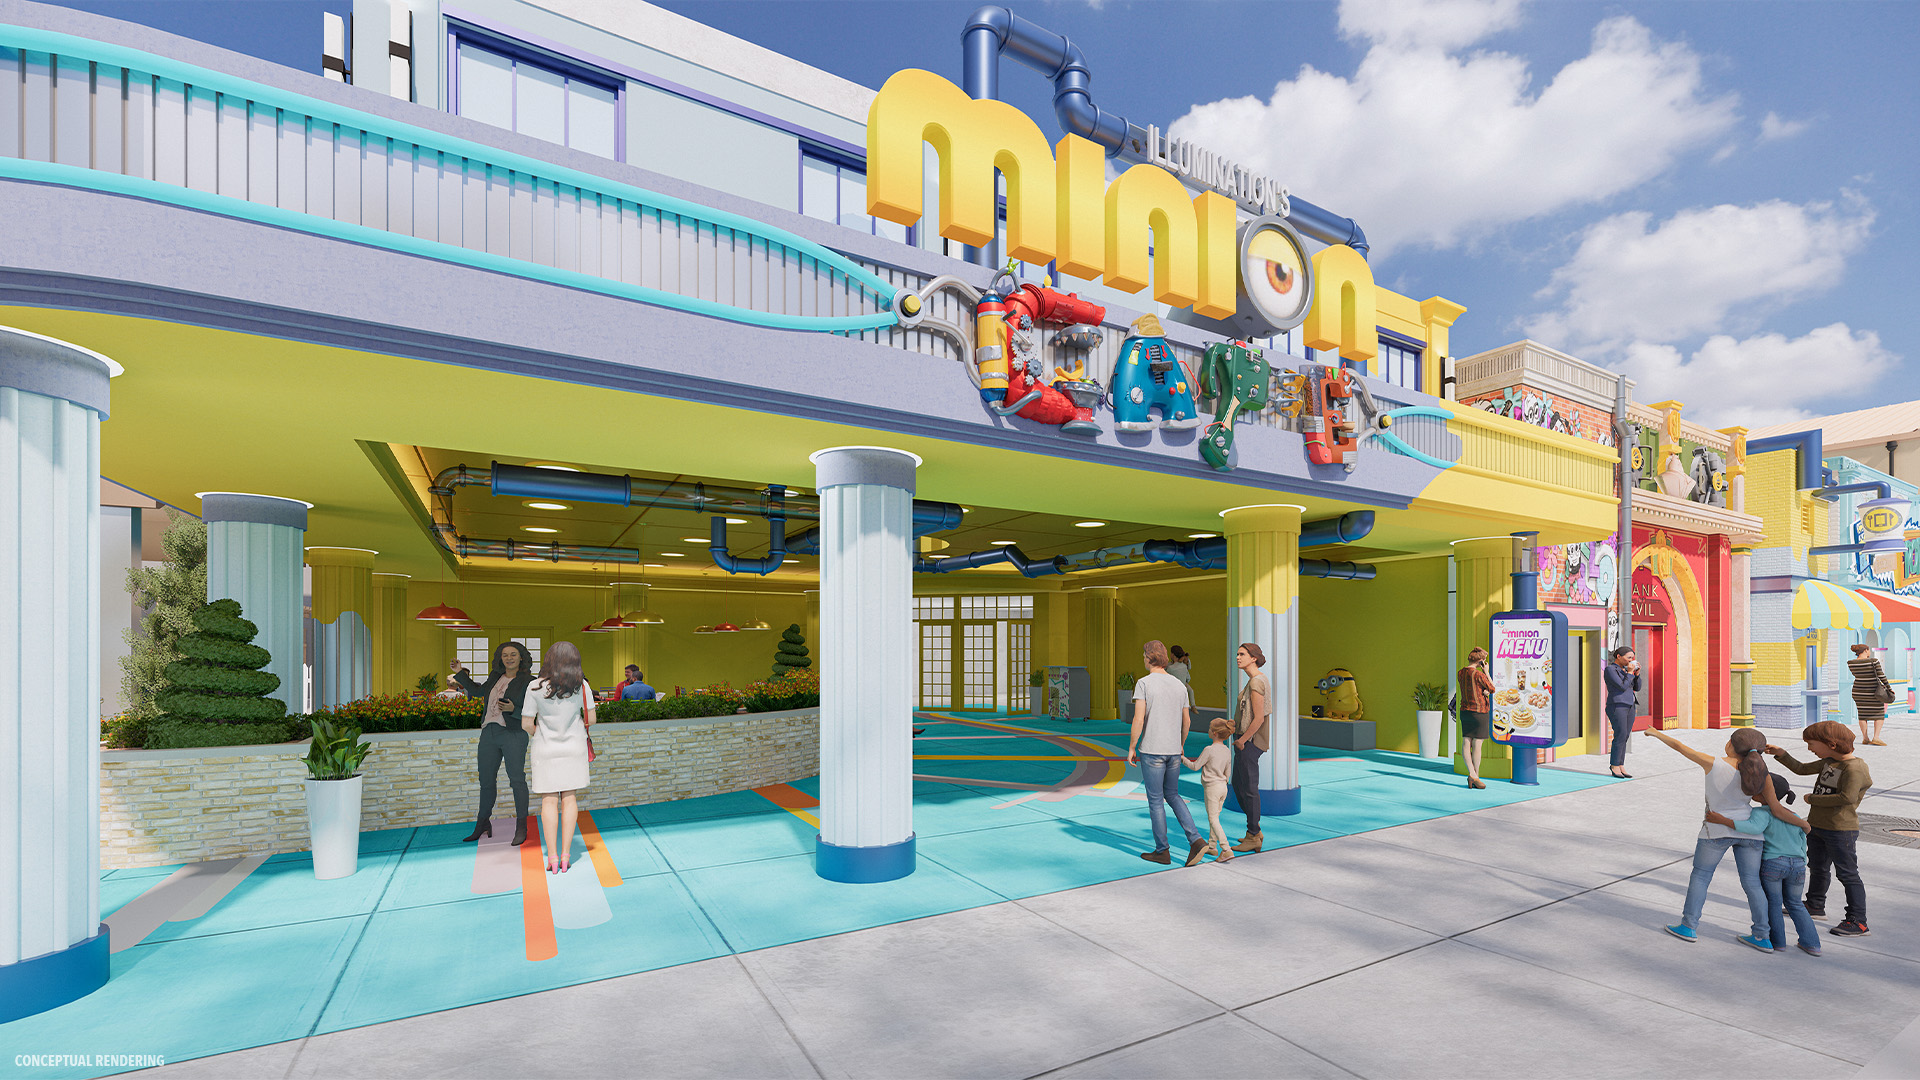 Universal is opening a Minions themed area in Orlando and it looks amazing! 